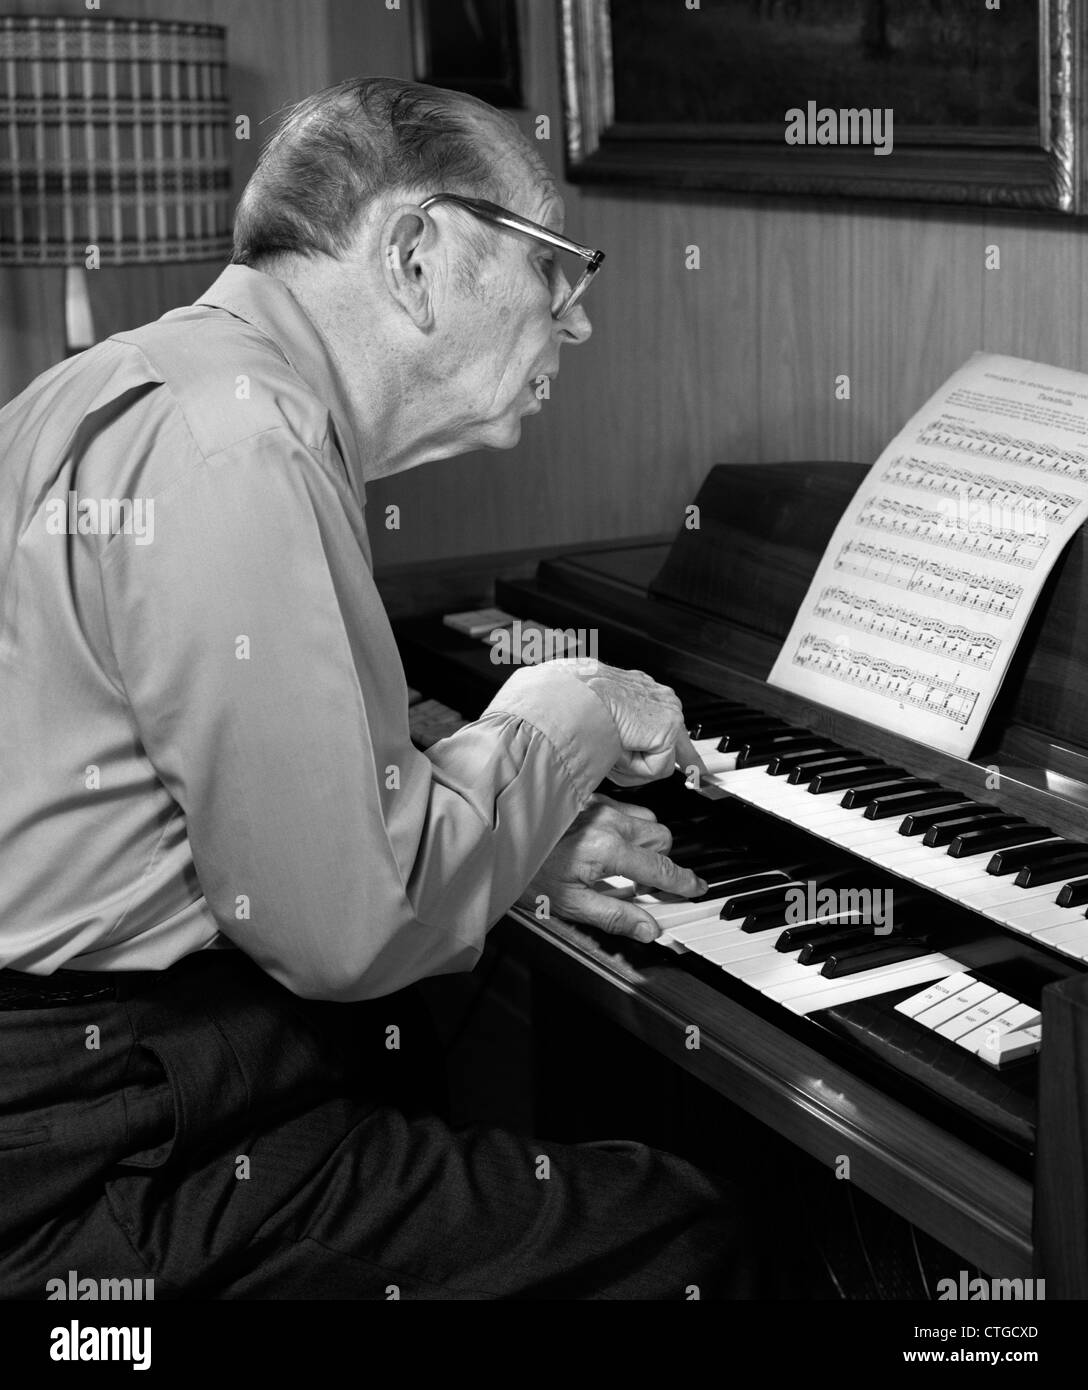 1970s ELDERLY MAN WEARING GLASSES LEANING FORWARD TO READ SHEET MUSIC WHILE PLAYING ORGAN Stock Photo